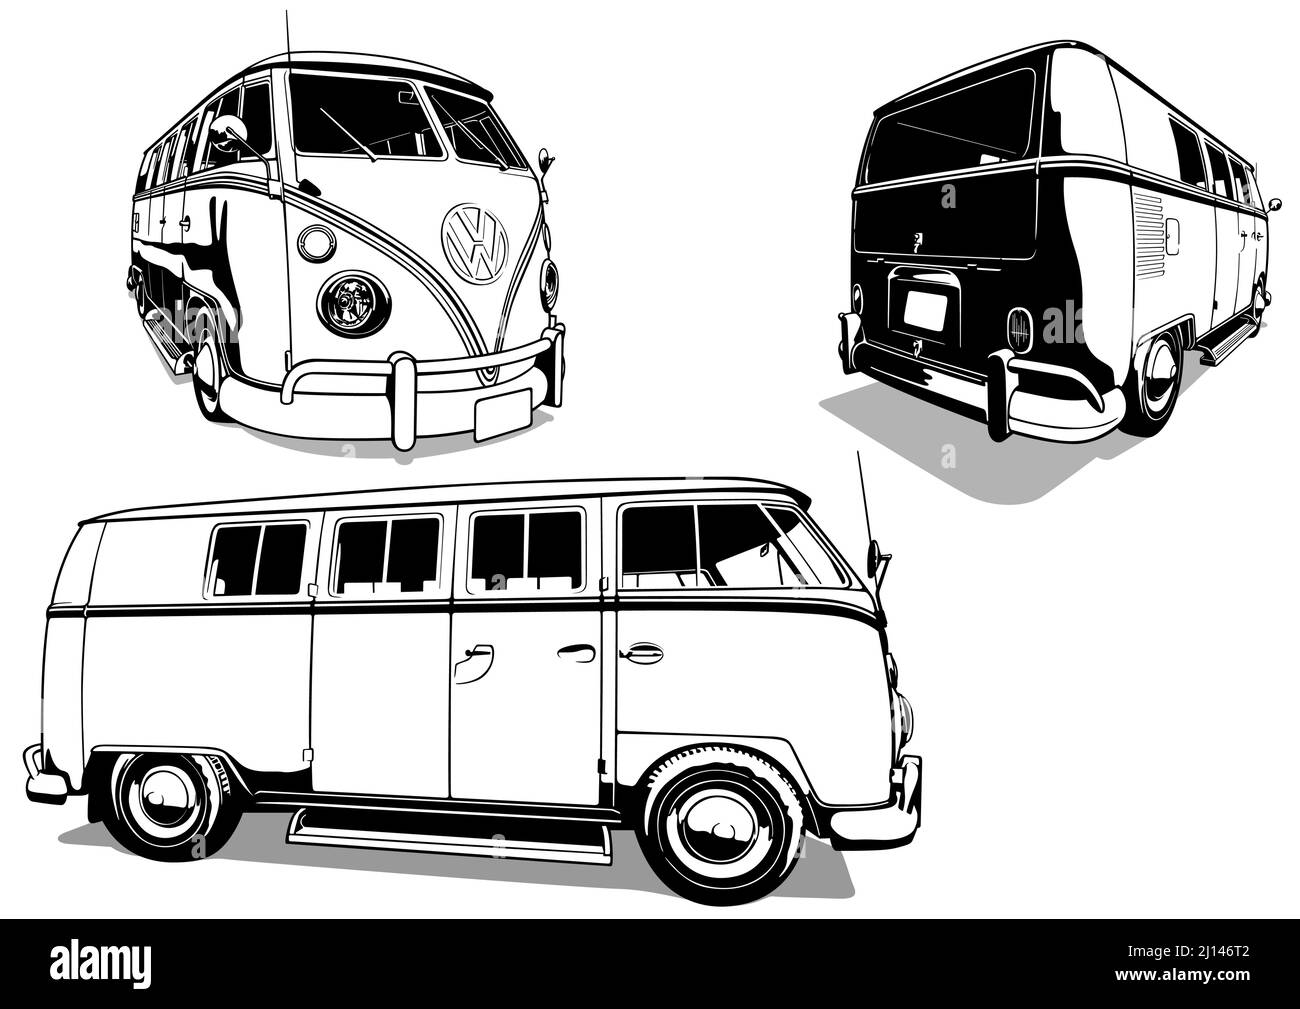 Vw bus travel Black and White Stock Photos & Images - Alamy